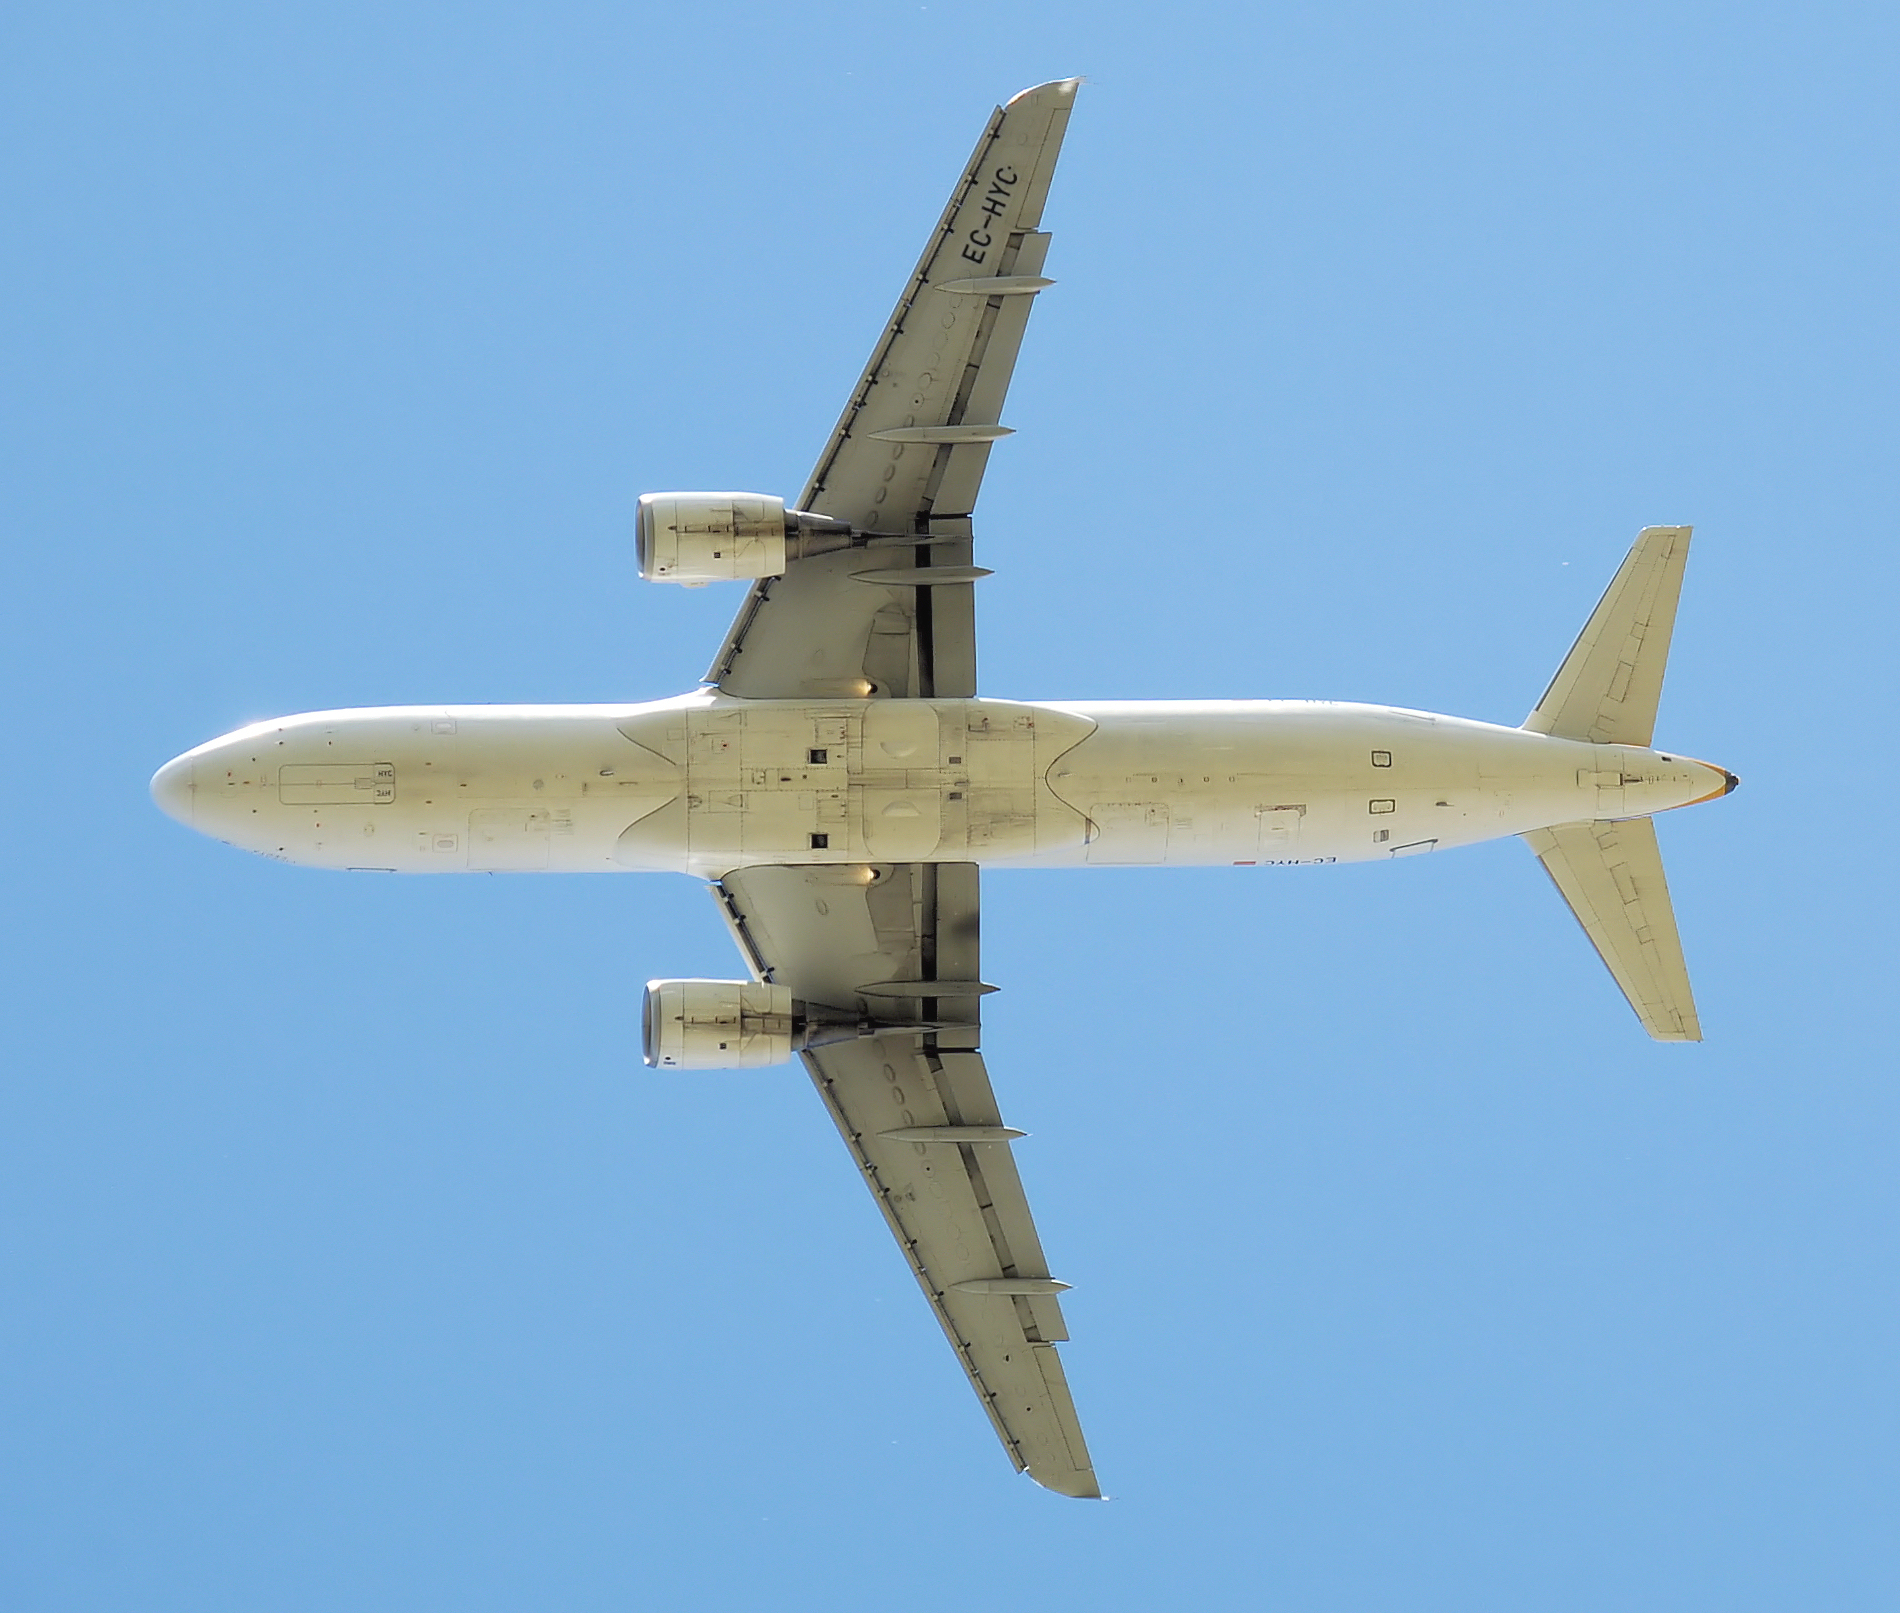 Planform view of an Iberia ((Airbus)) A320-200